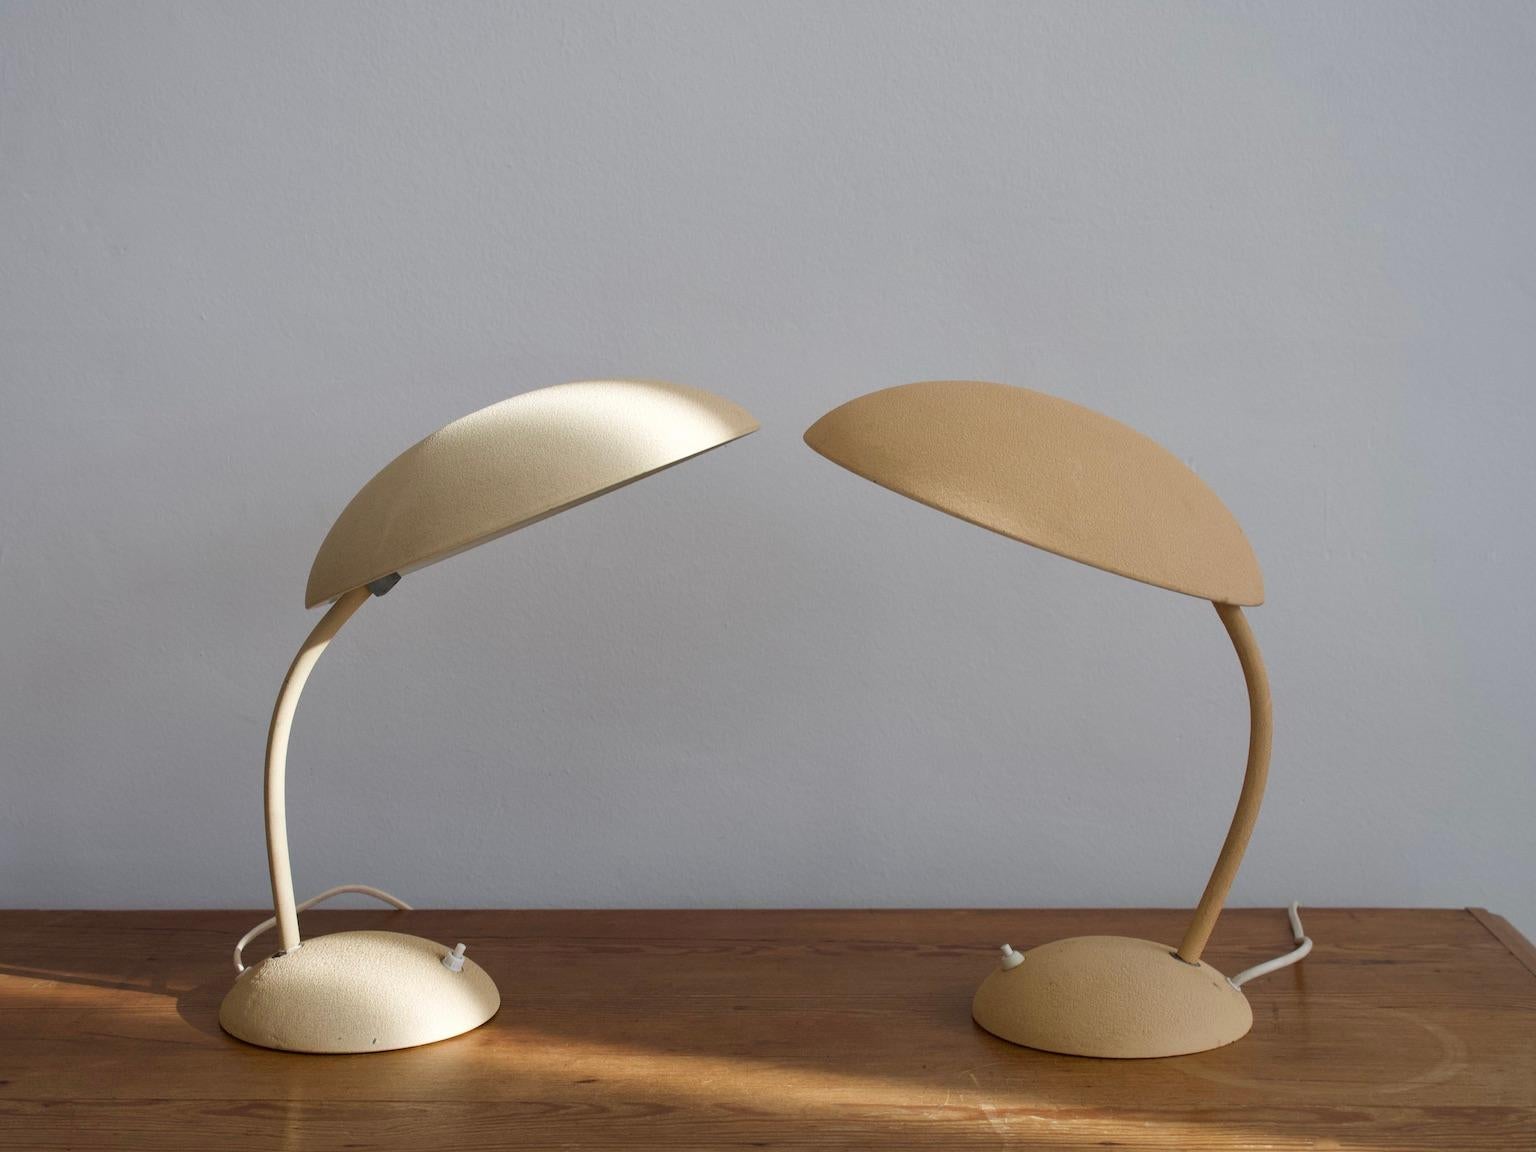 Pair of desk lamps from circa 1930 by a Scandinavian maker. Made of beige lacquered metal, adjustable screen. European plug.
Please note that the lamps are exactly the same color, although they appear a bit different on the photos due to lighting.